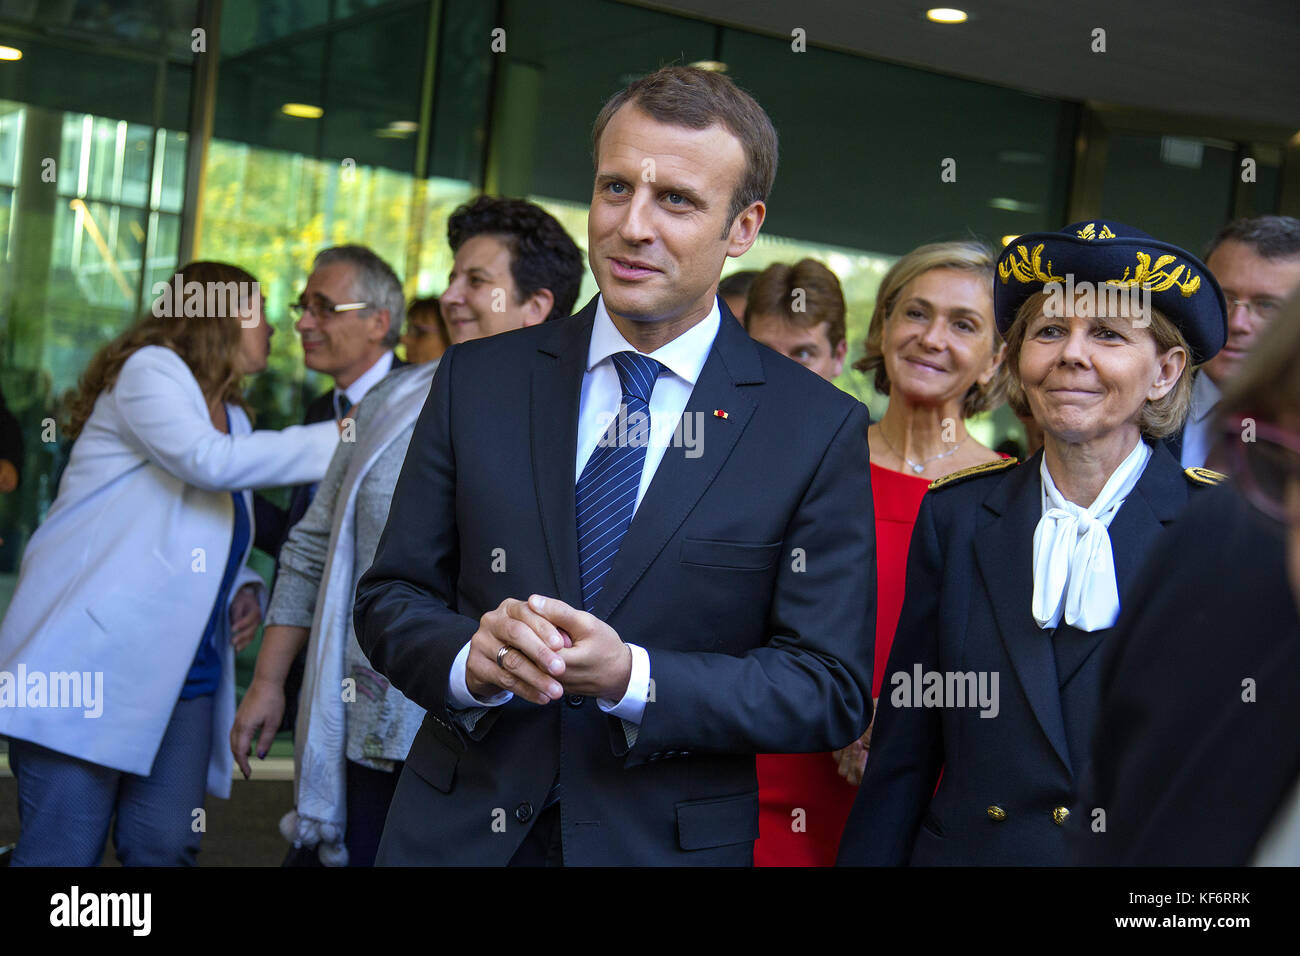 Paris, France. 25th Oct, 2017. French President Emmanuel Macron seen arriving at the university. French President Emmanuel Macron visits the University Paris Saclay for the inauguration of l'Institut de mathématique d'Orsay and CentraleSupélec. Credit: SOPA/ZUMA Wire/Alamy Live News Stock Photo